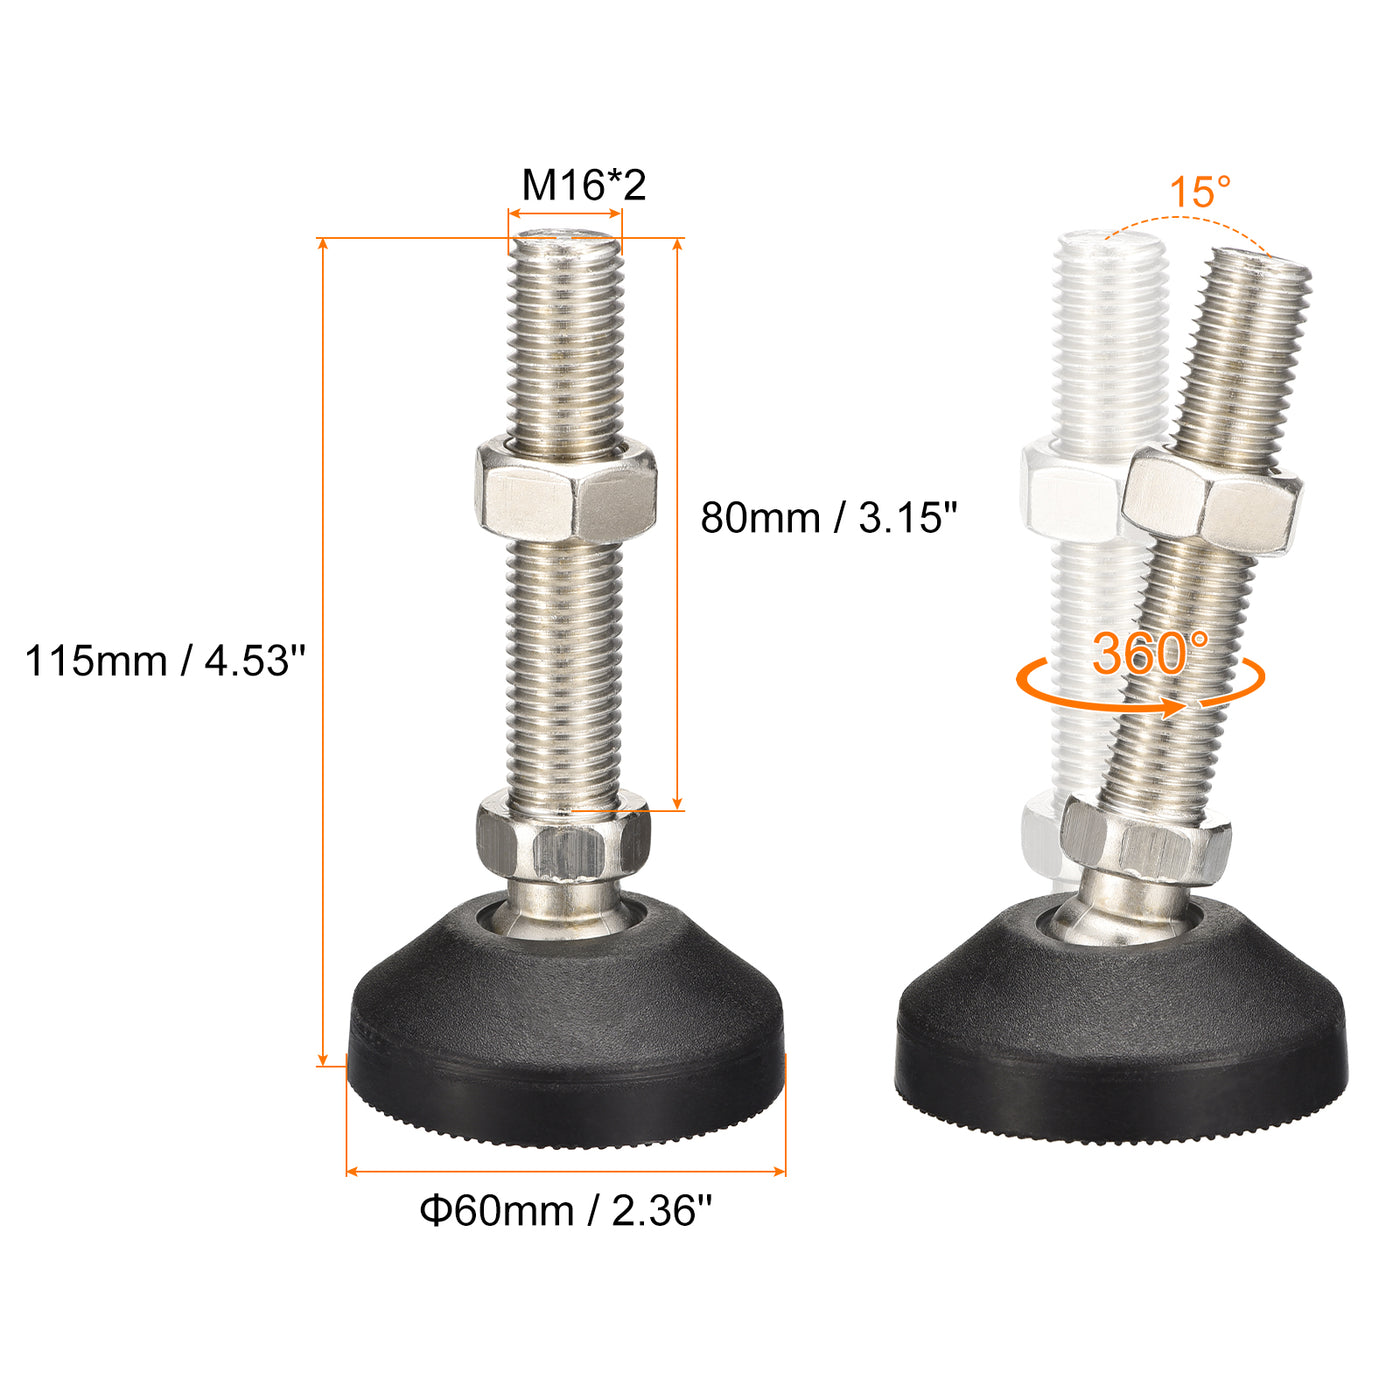 uxcell Uxcell Furniture Levelers, 1Pcs M16x80x60mm Nylon Universal Leveling Feet, Adjustable Swivel Table Feet for Furniture Workshop Machines Machinery Equipment